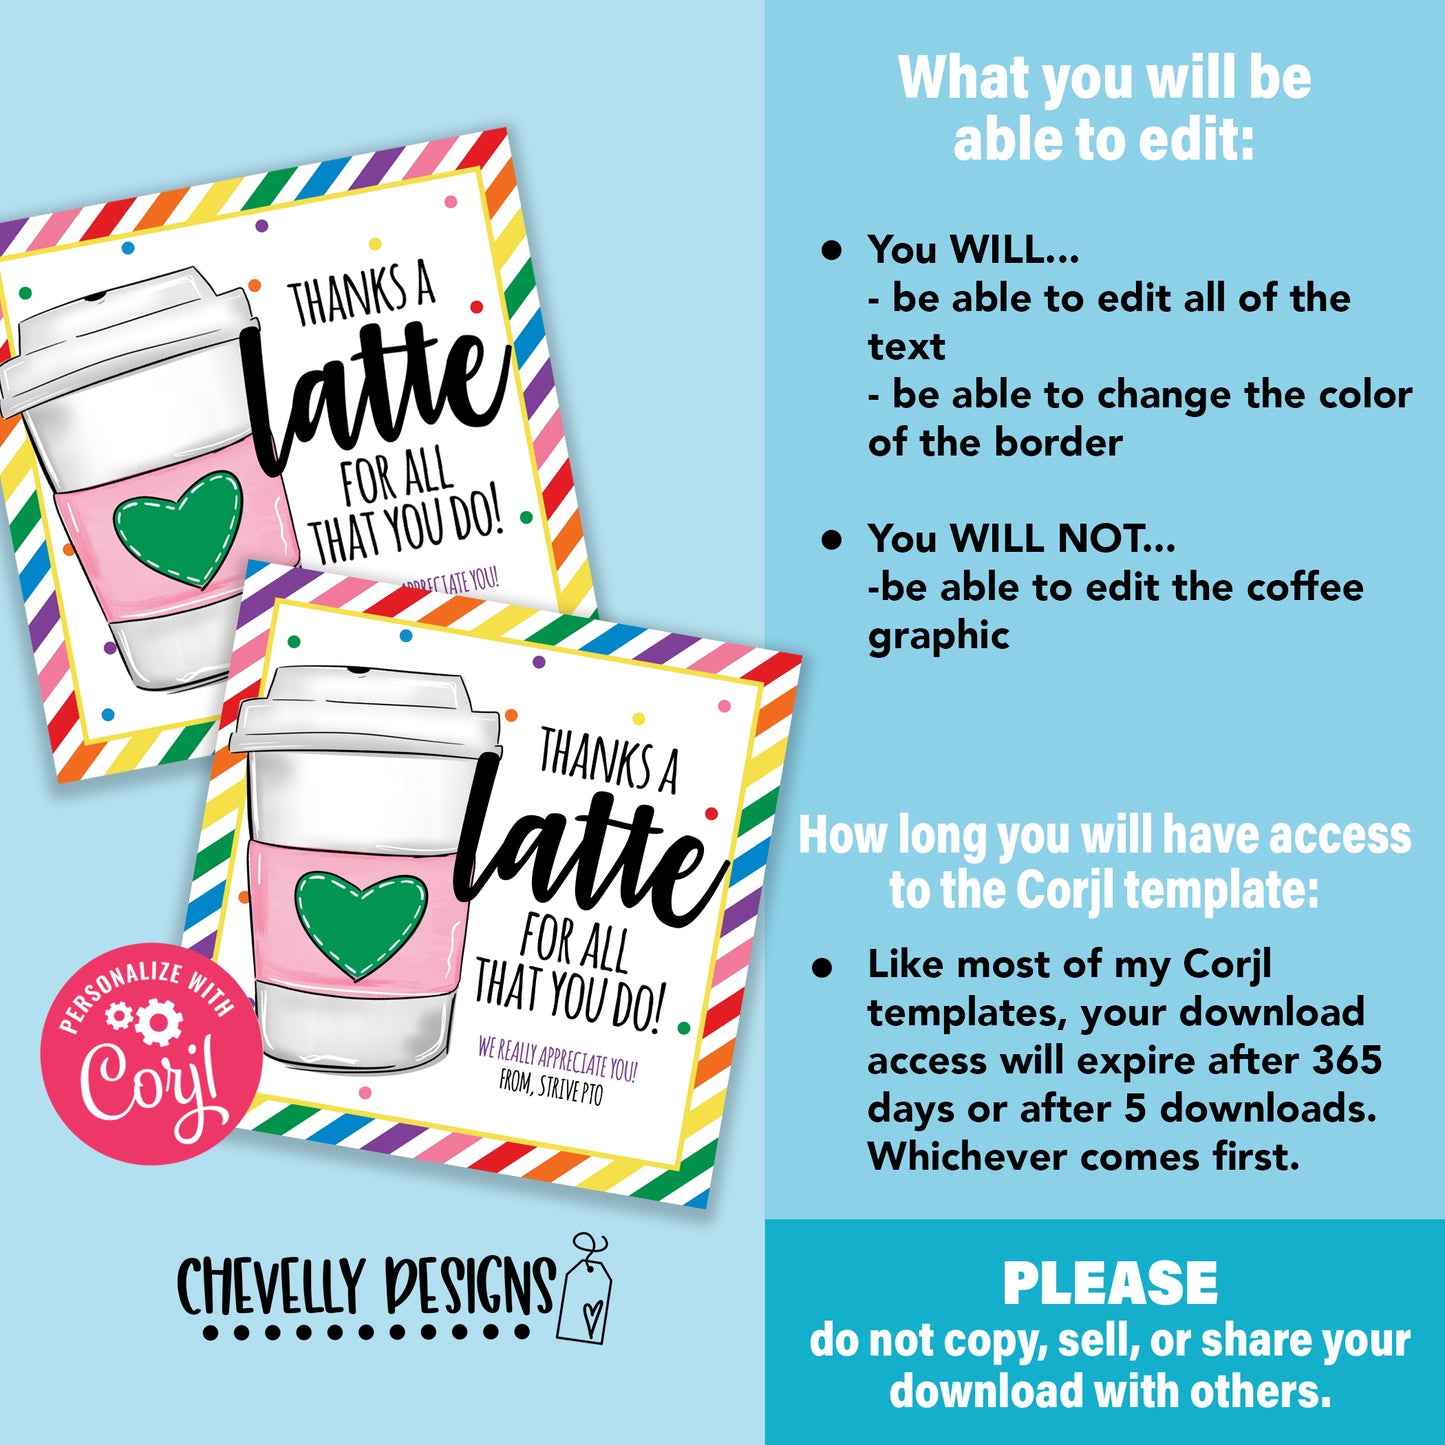 EDITABLE - Thanks a Latte For All That You Do - Staff Appreciation Gift Tags - Printable Digital File